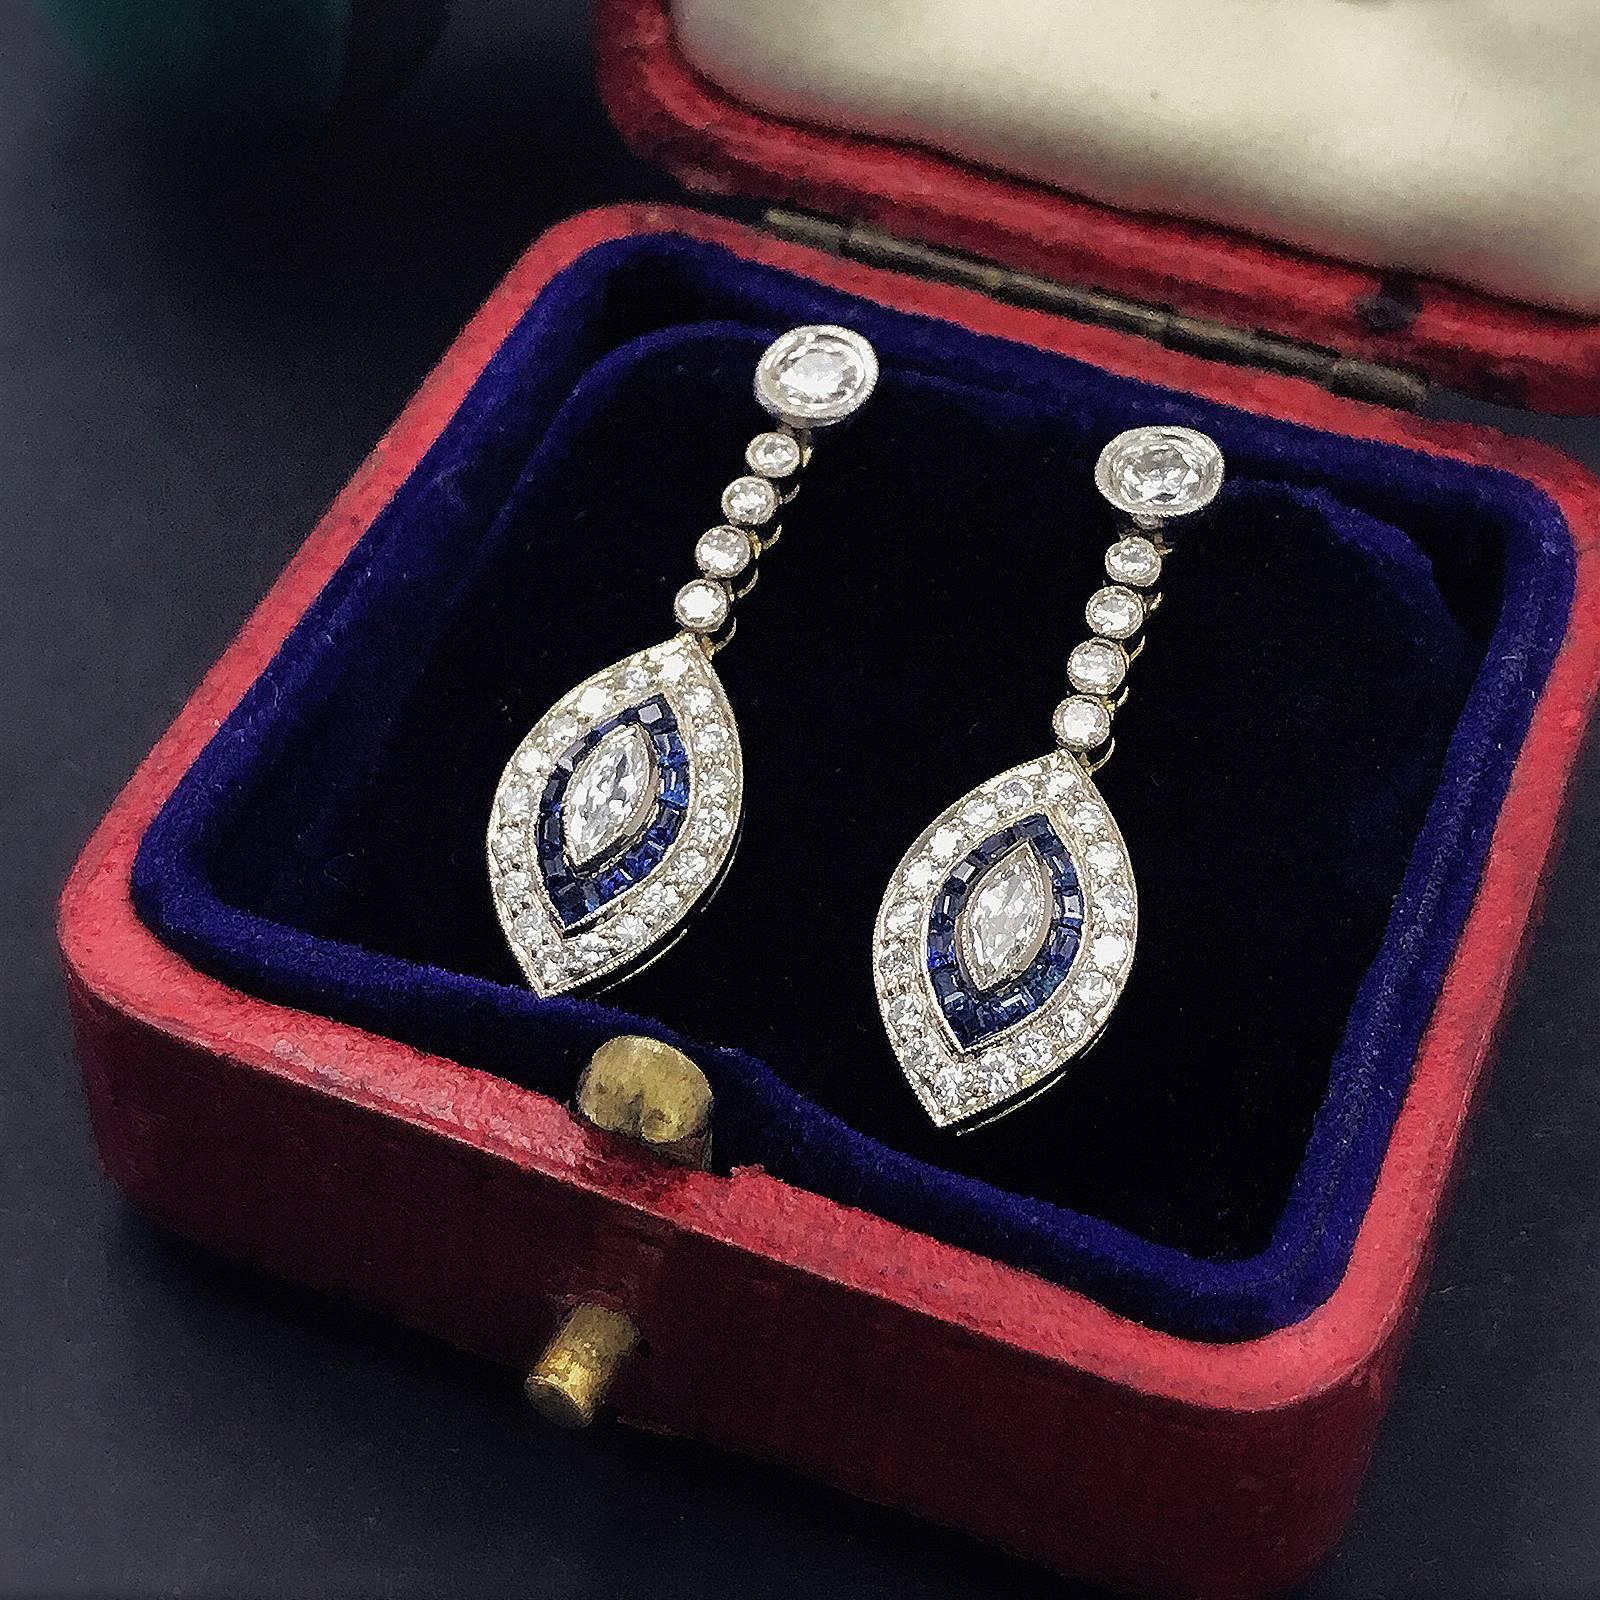 A pair of 1920‘ gold and platinum, blue sapphire and diamond earrings. Design as diamond line with a marque shape drop. Central marque diamond,  accented by fancy-shaped and calibre-cut French-cut sapphires, and outer liner set with round white